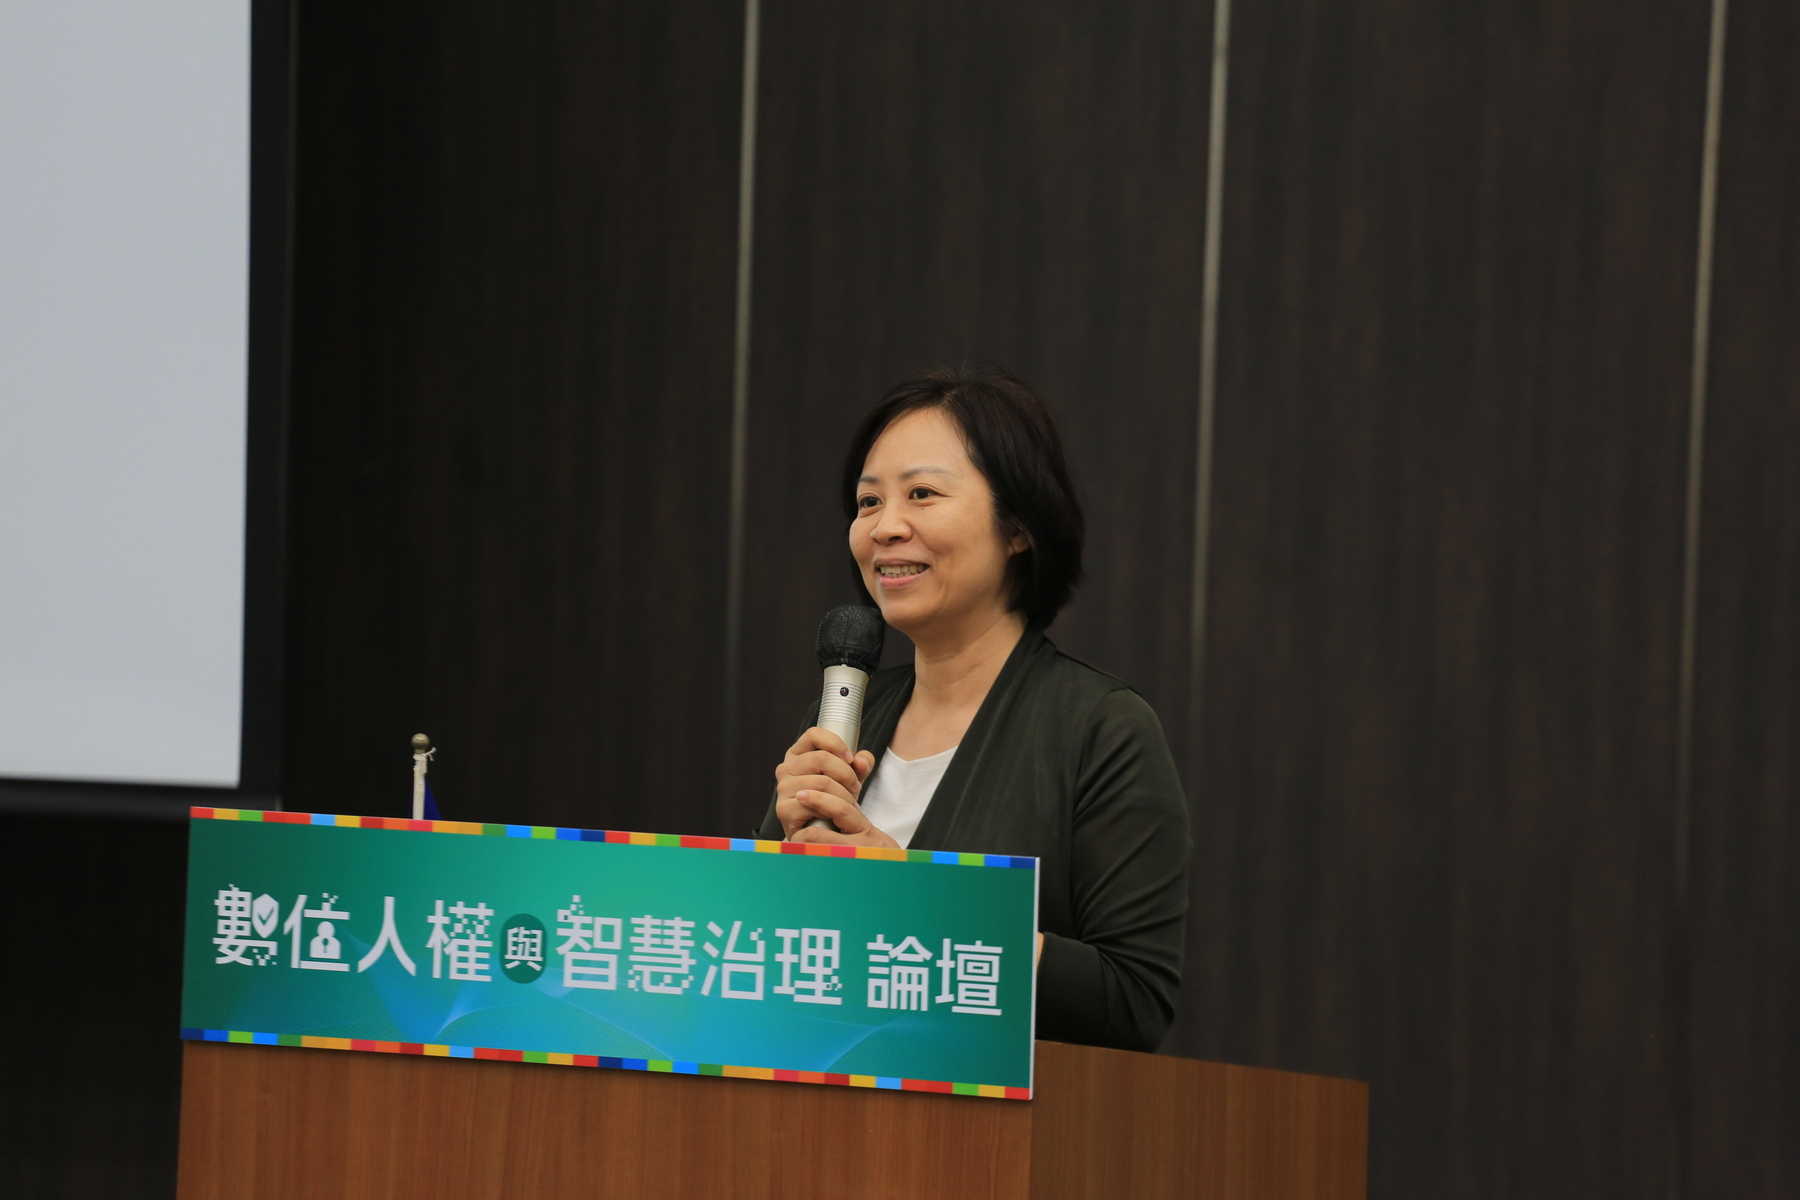 Yen-Wen Peng, Chair of NSYSU’s Institute of Public Affairs Management, indicated that artificial intelligence should be utilized to bridge digital gaps rather than solely being rejected to prevent corruption.